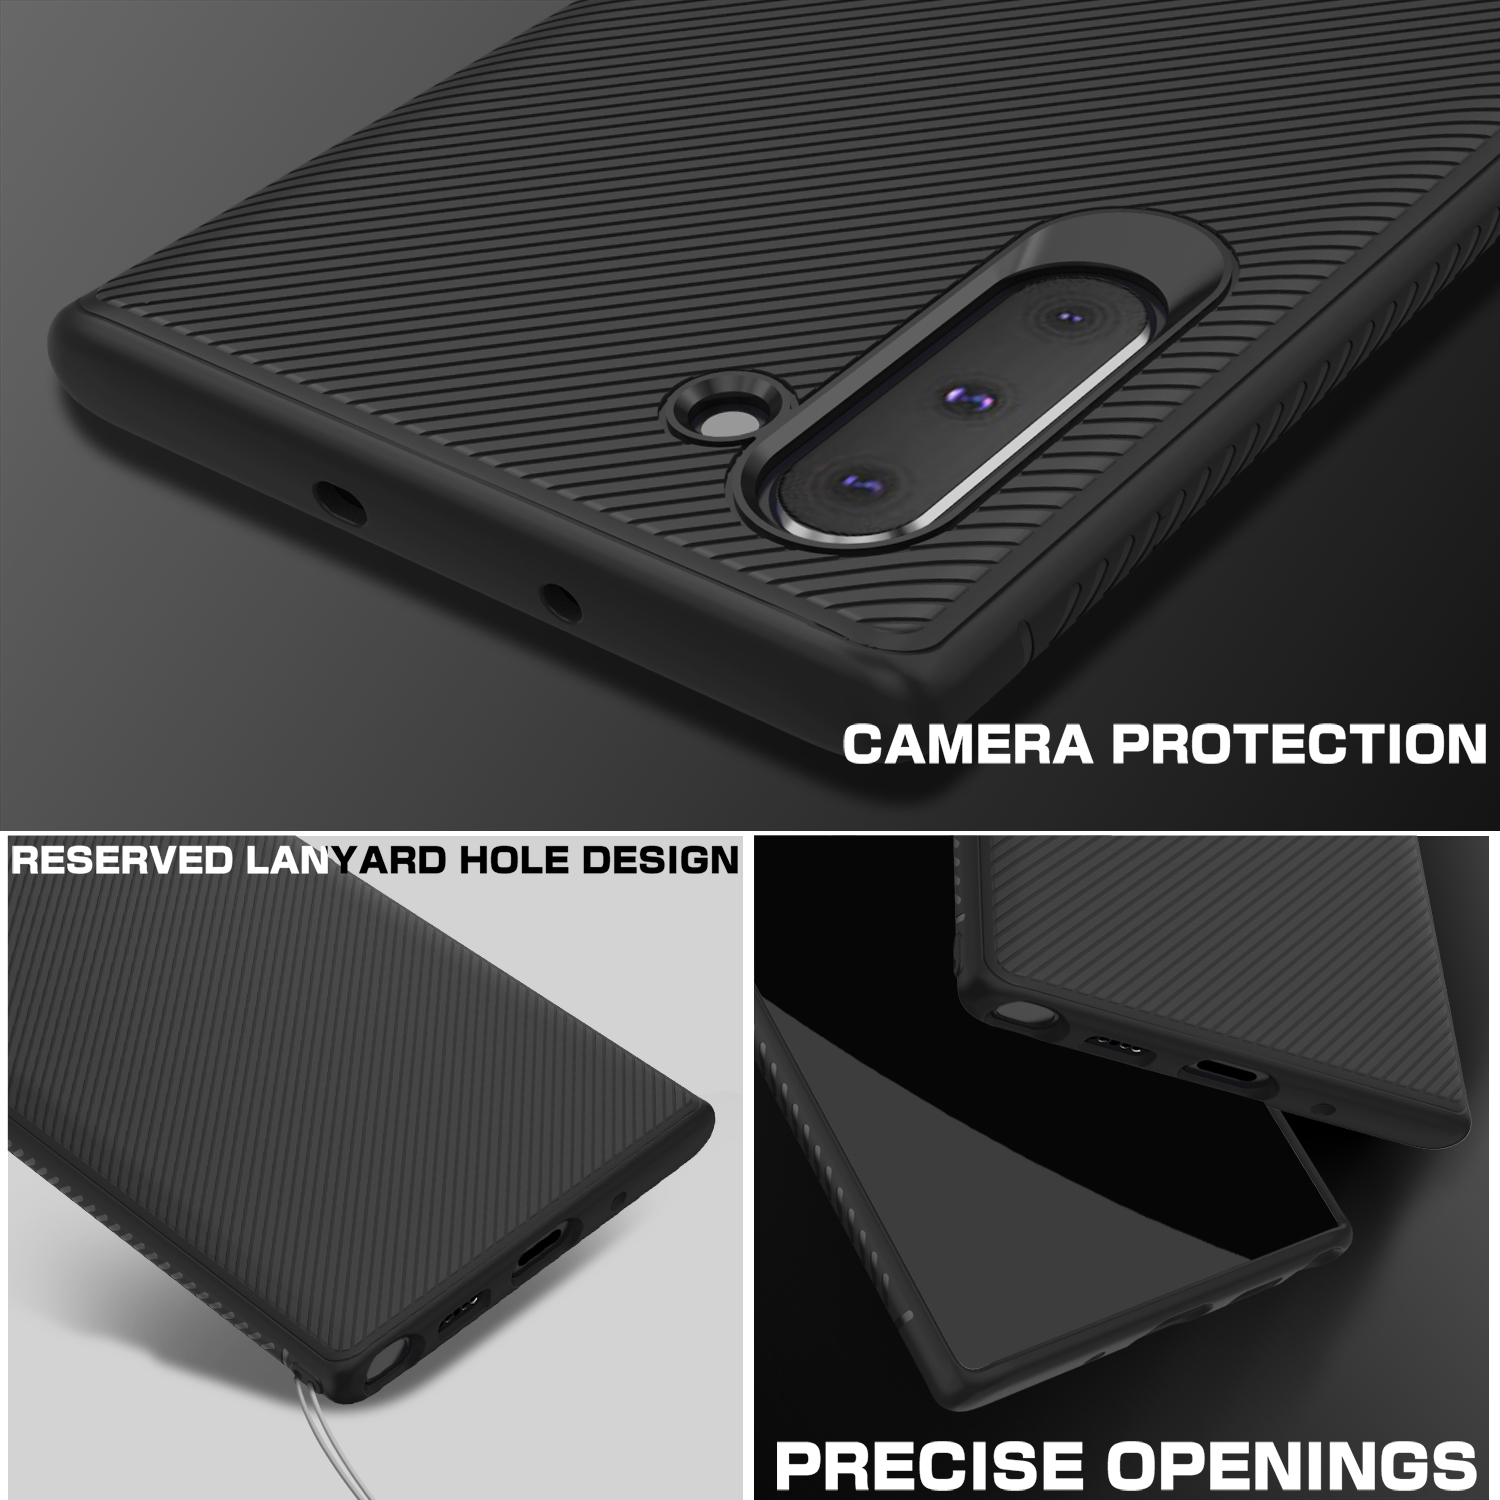 Bakeey-Carbon-Fiber-Protective-Case-For-Samsung-Galaxy-Note-10Note-10-5G-Shockproof-Soft-TPU-Back-Co-1544433-4